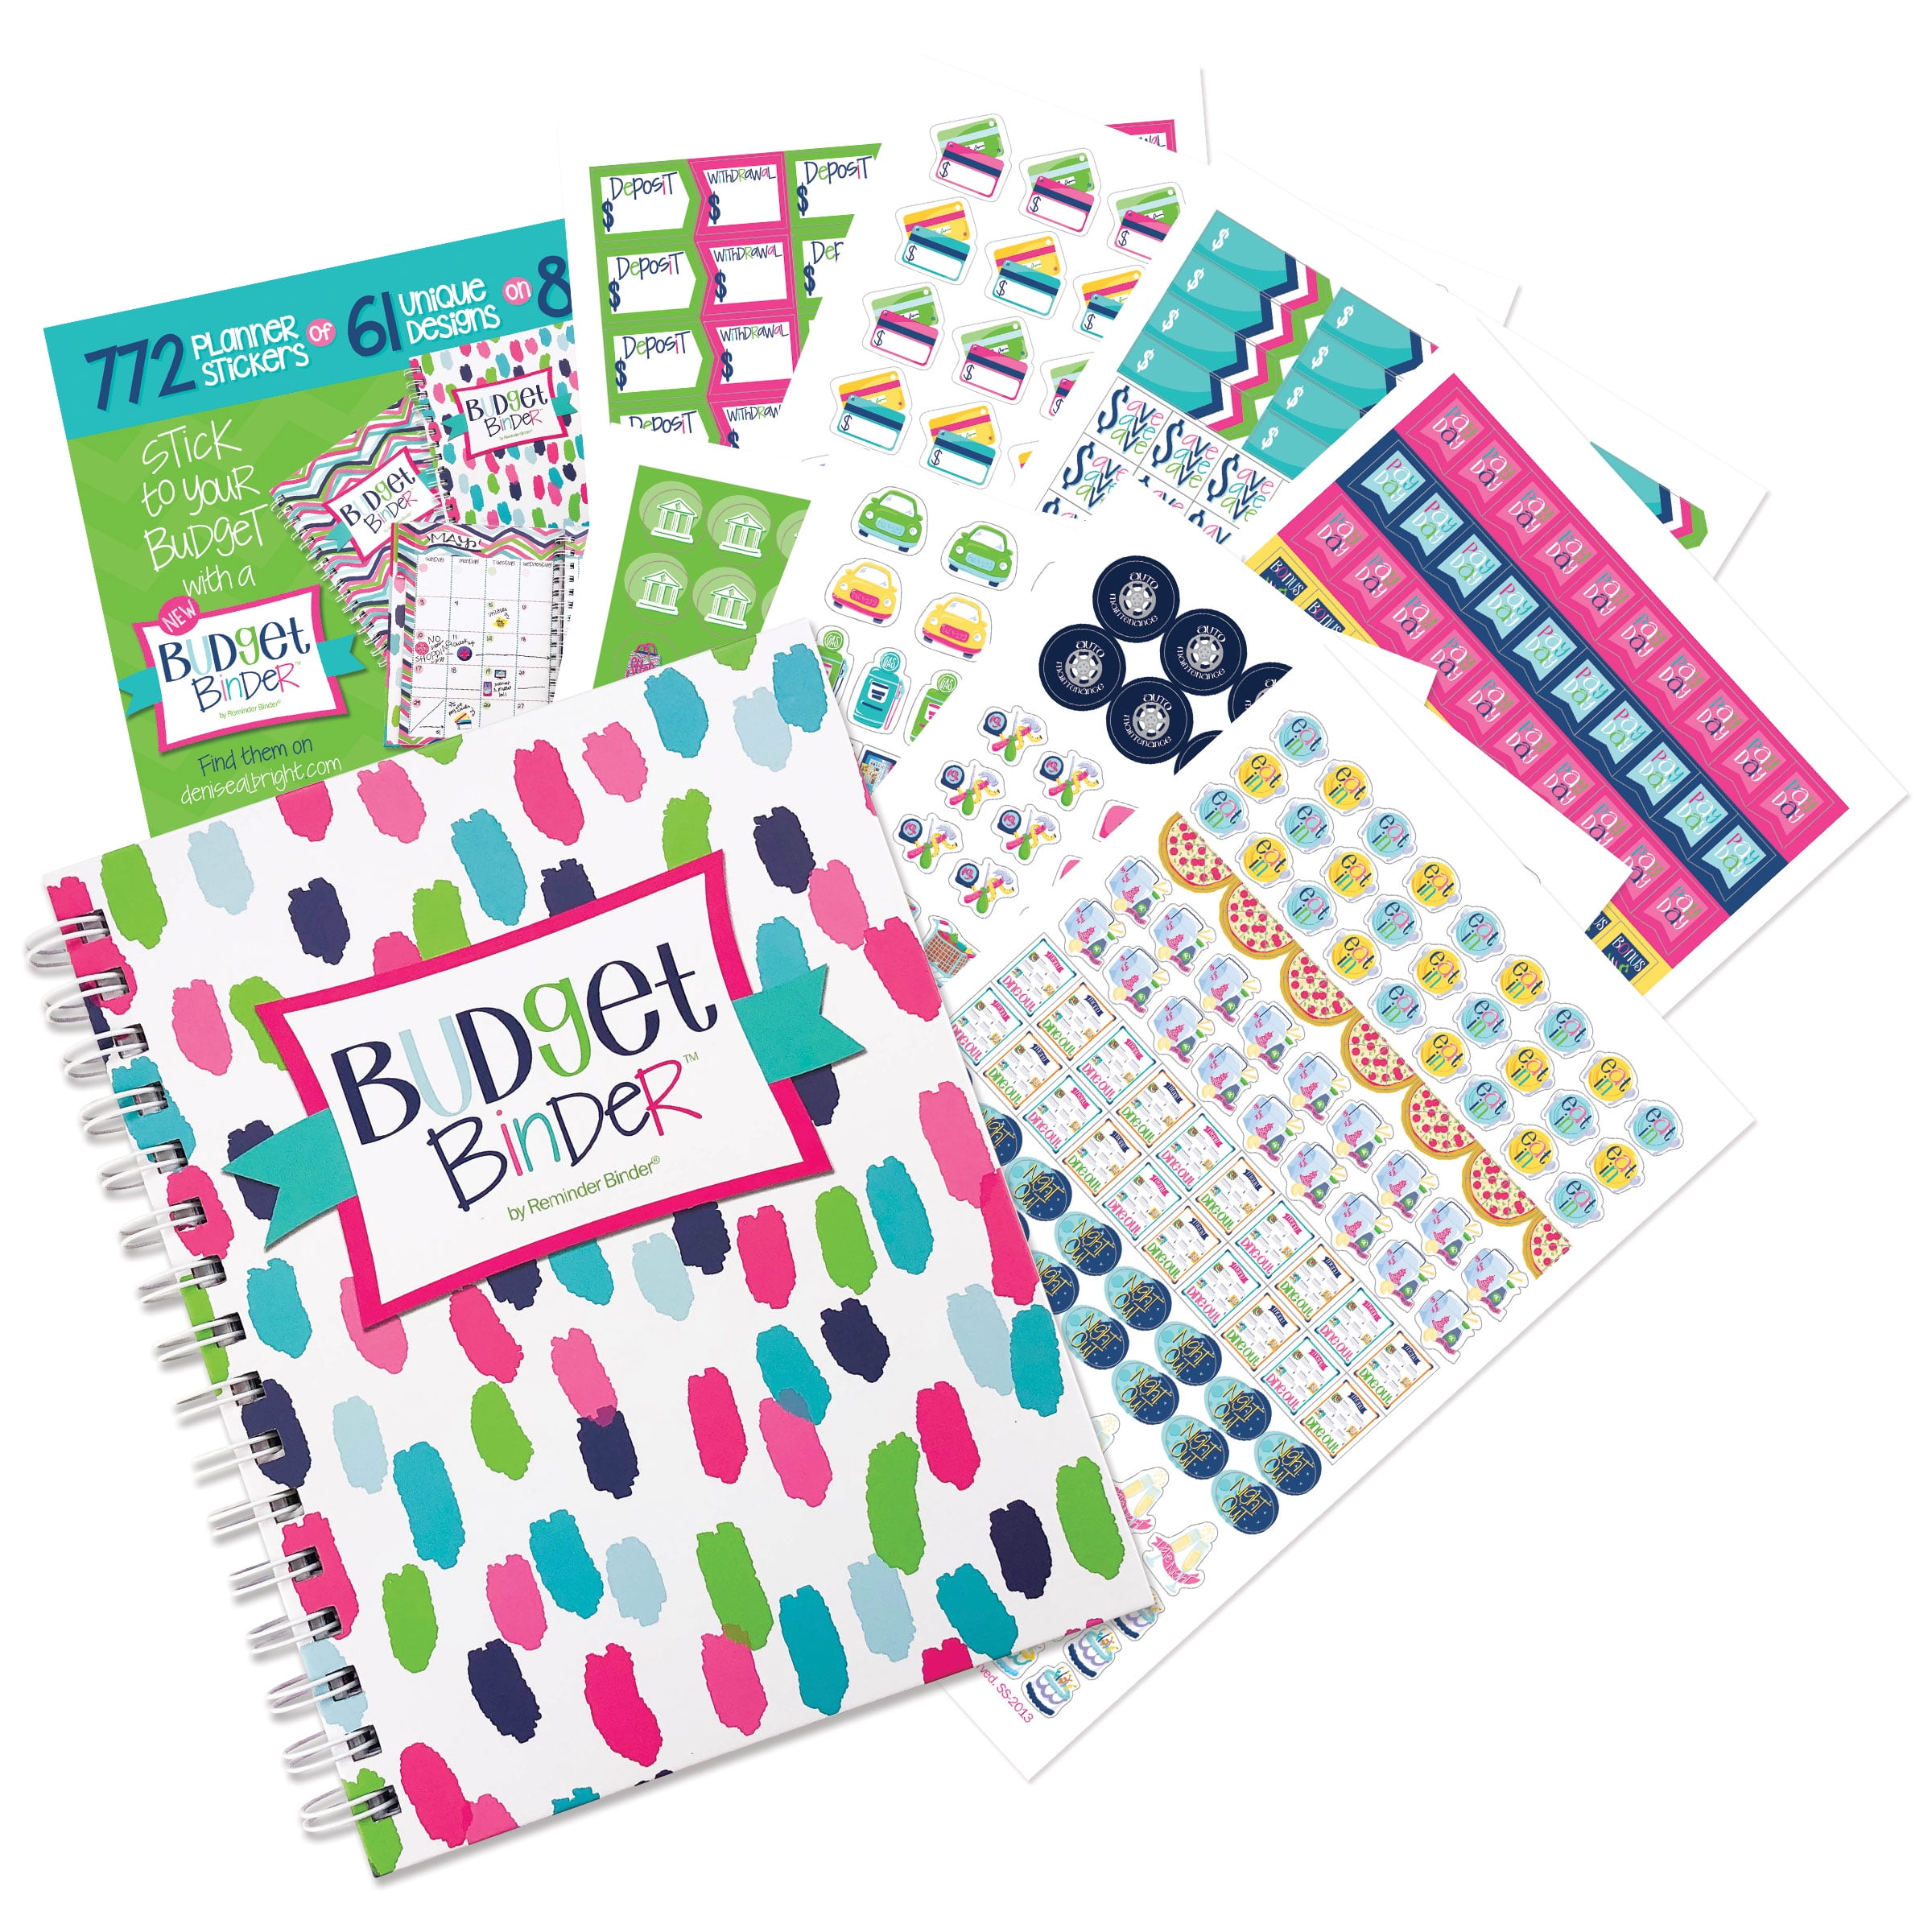 NICKANG Planner Stickers and Accessories | 31Sheets/1740+Pcs | Productivity  & Decorative Stickers and Accessories, Ideal for Budget, to Do List